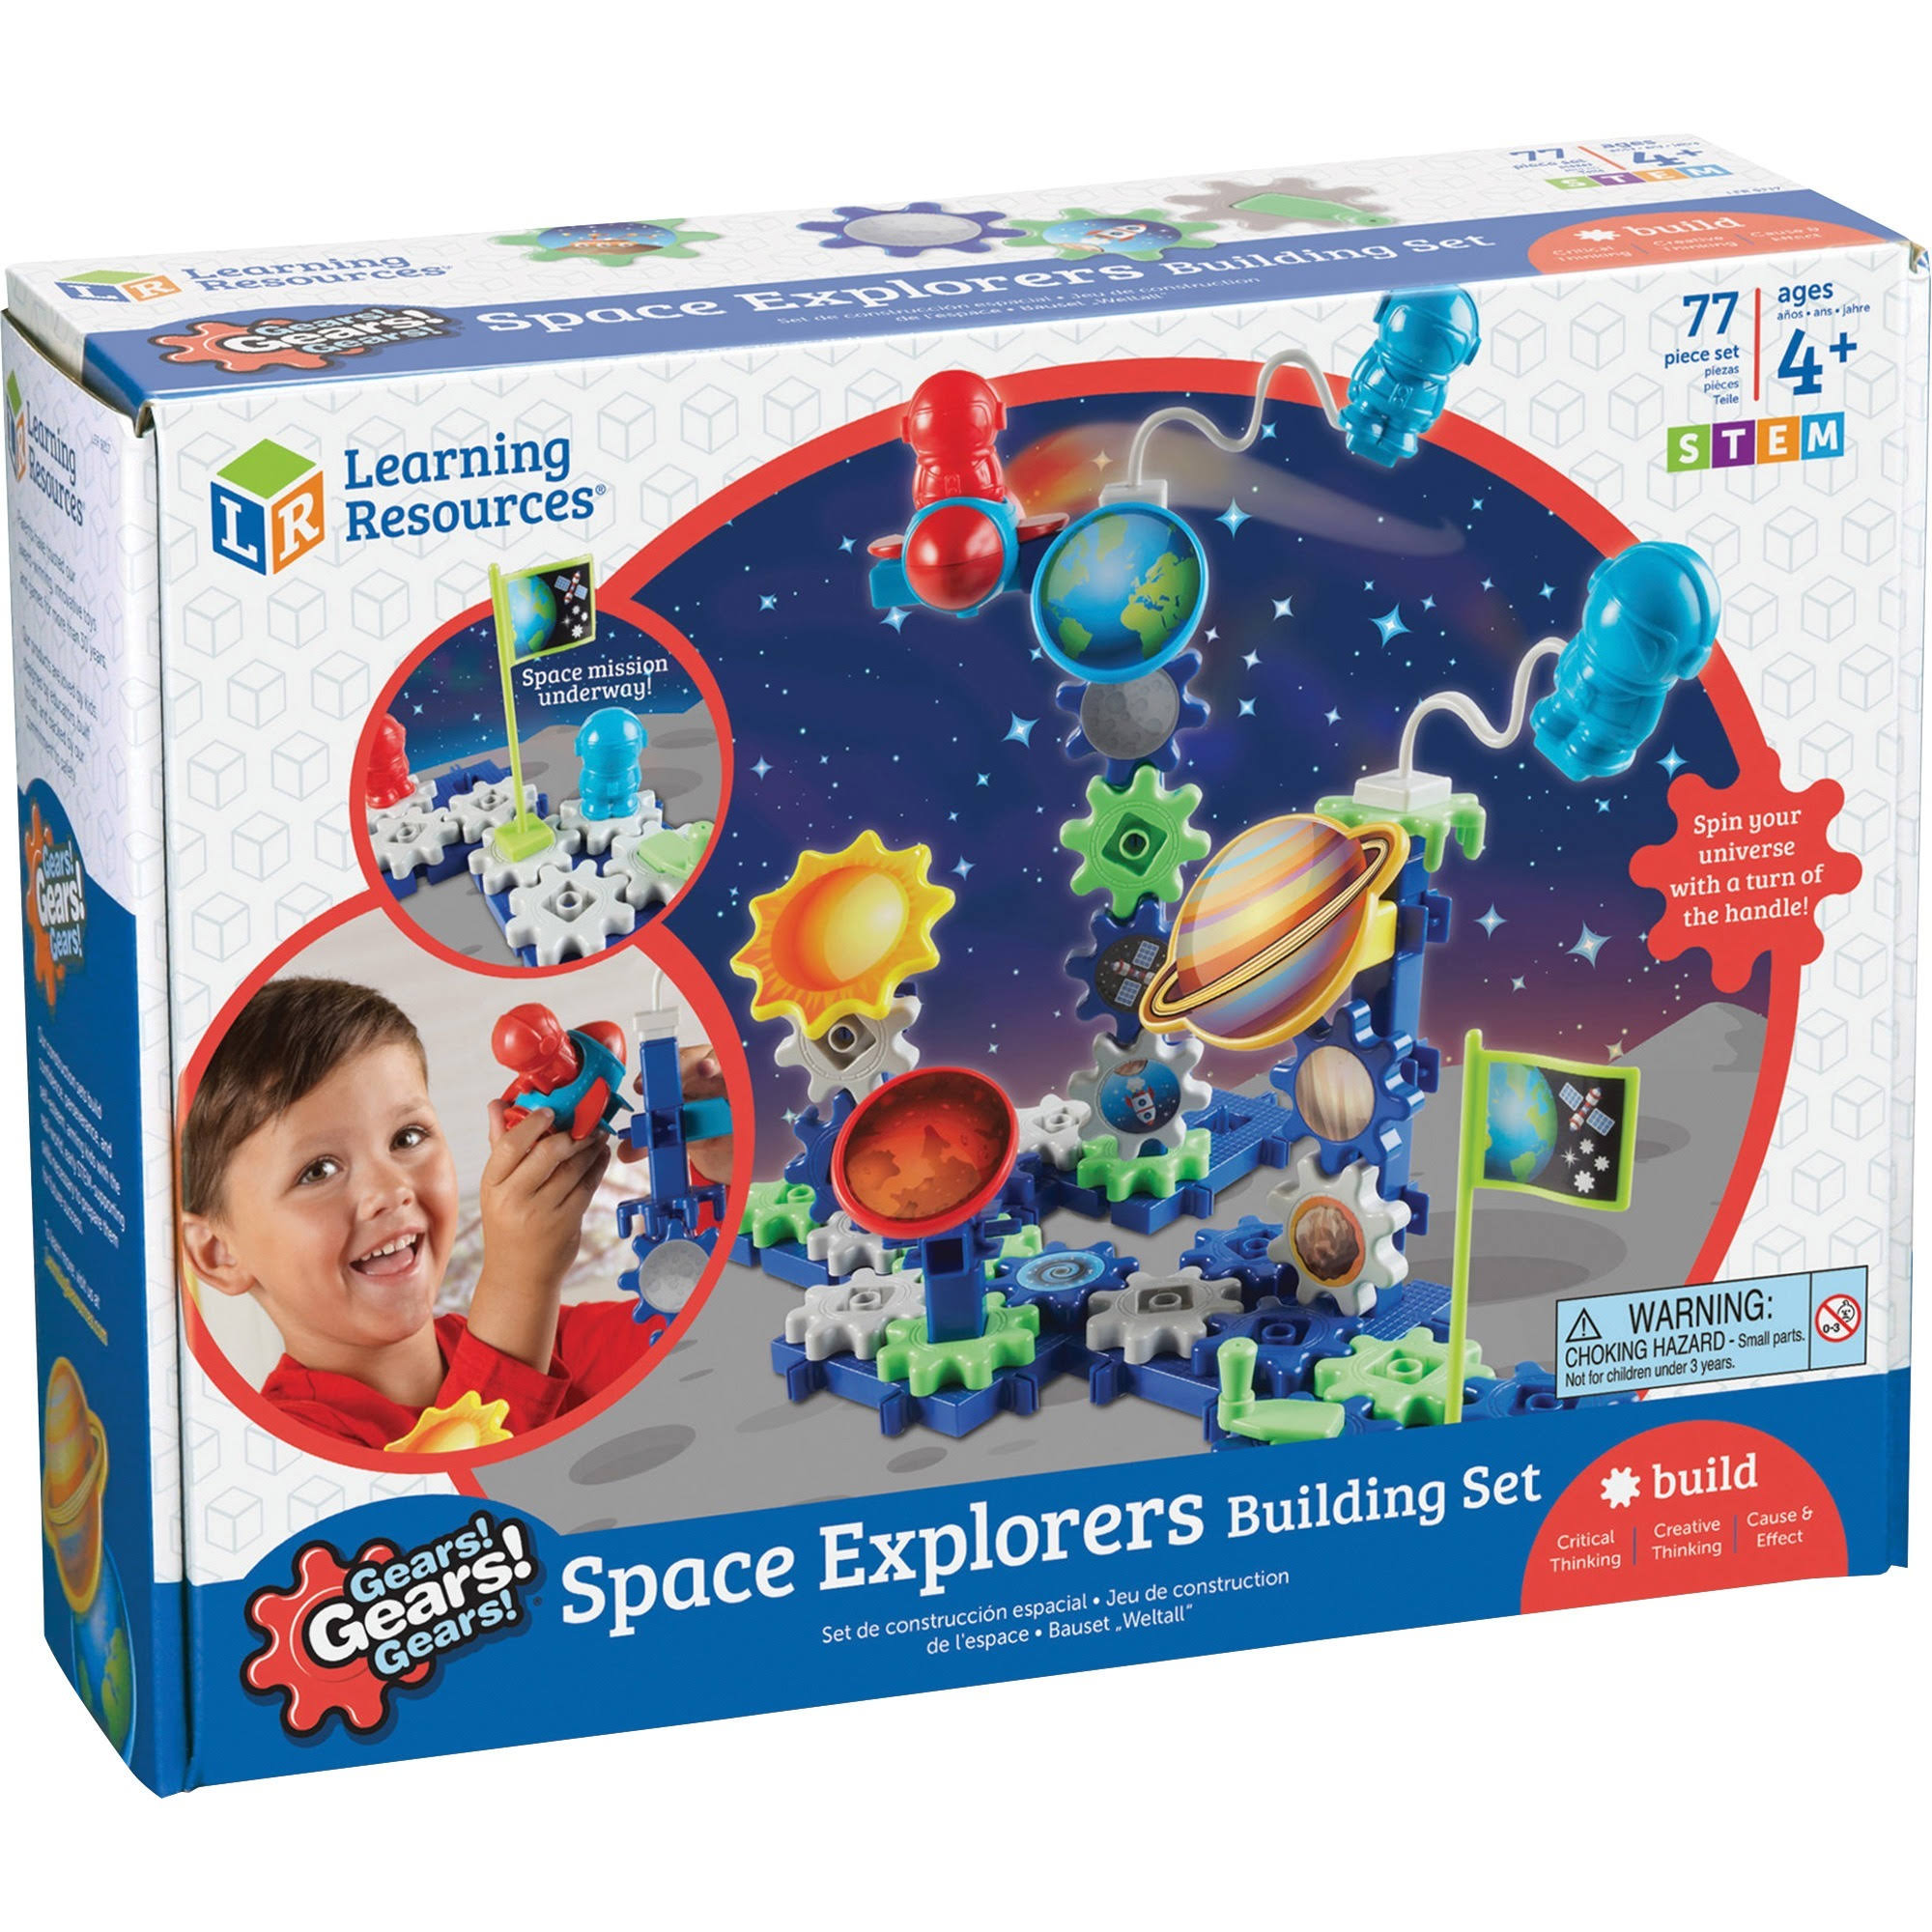 Learning Resources Gears! Gears! Gears! Space Explorers Building Set - 77pcs